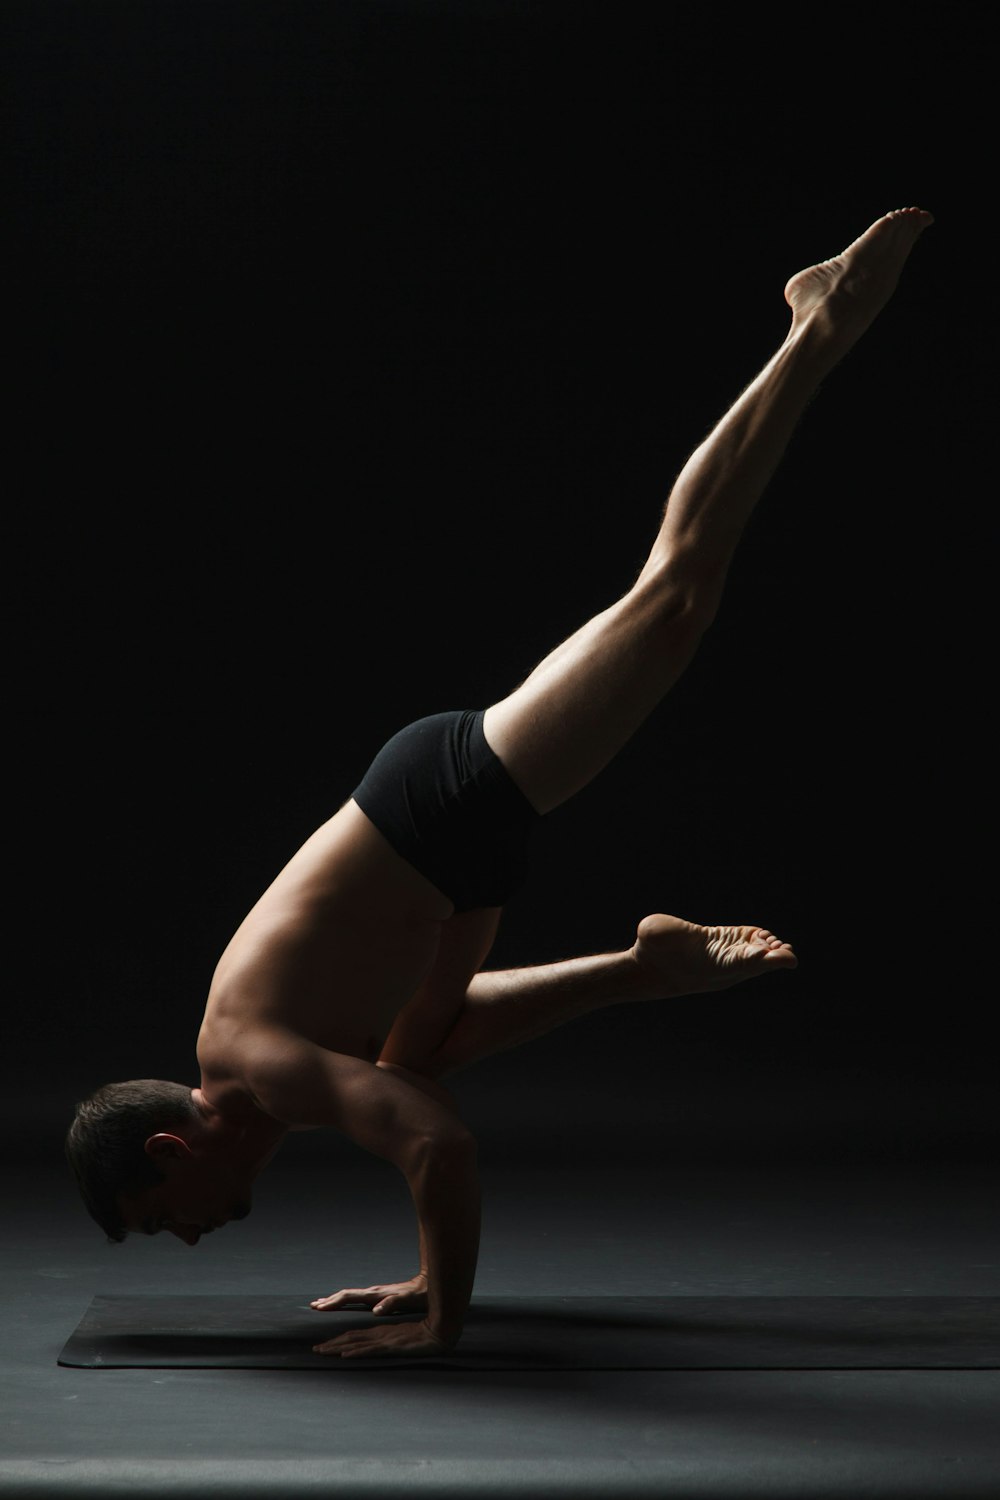 a man doing a handstand in the dark